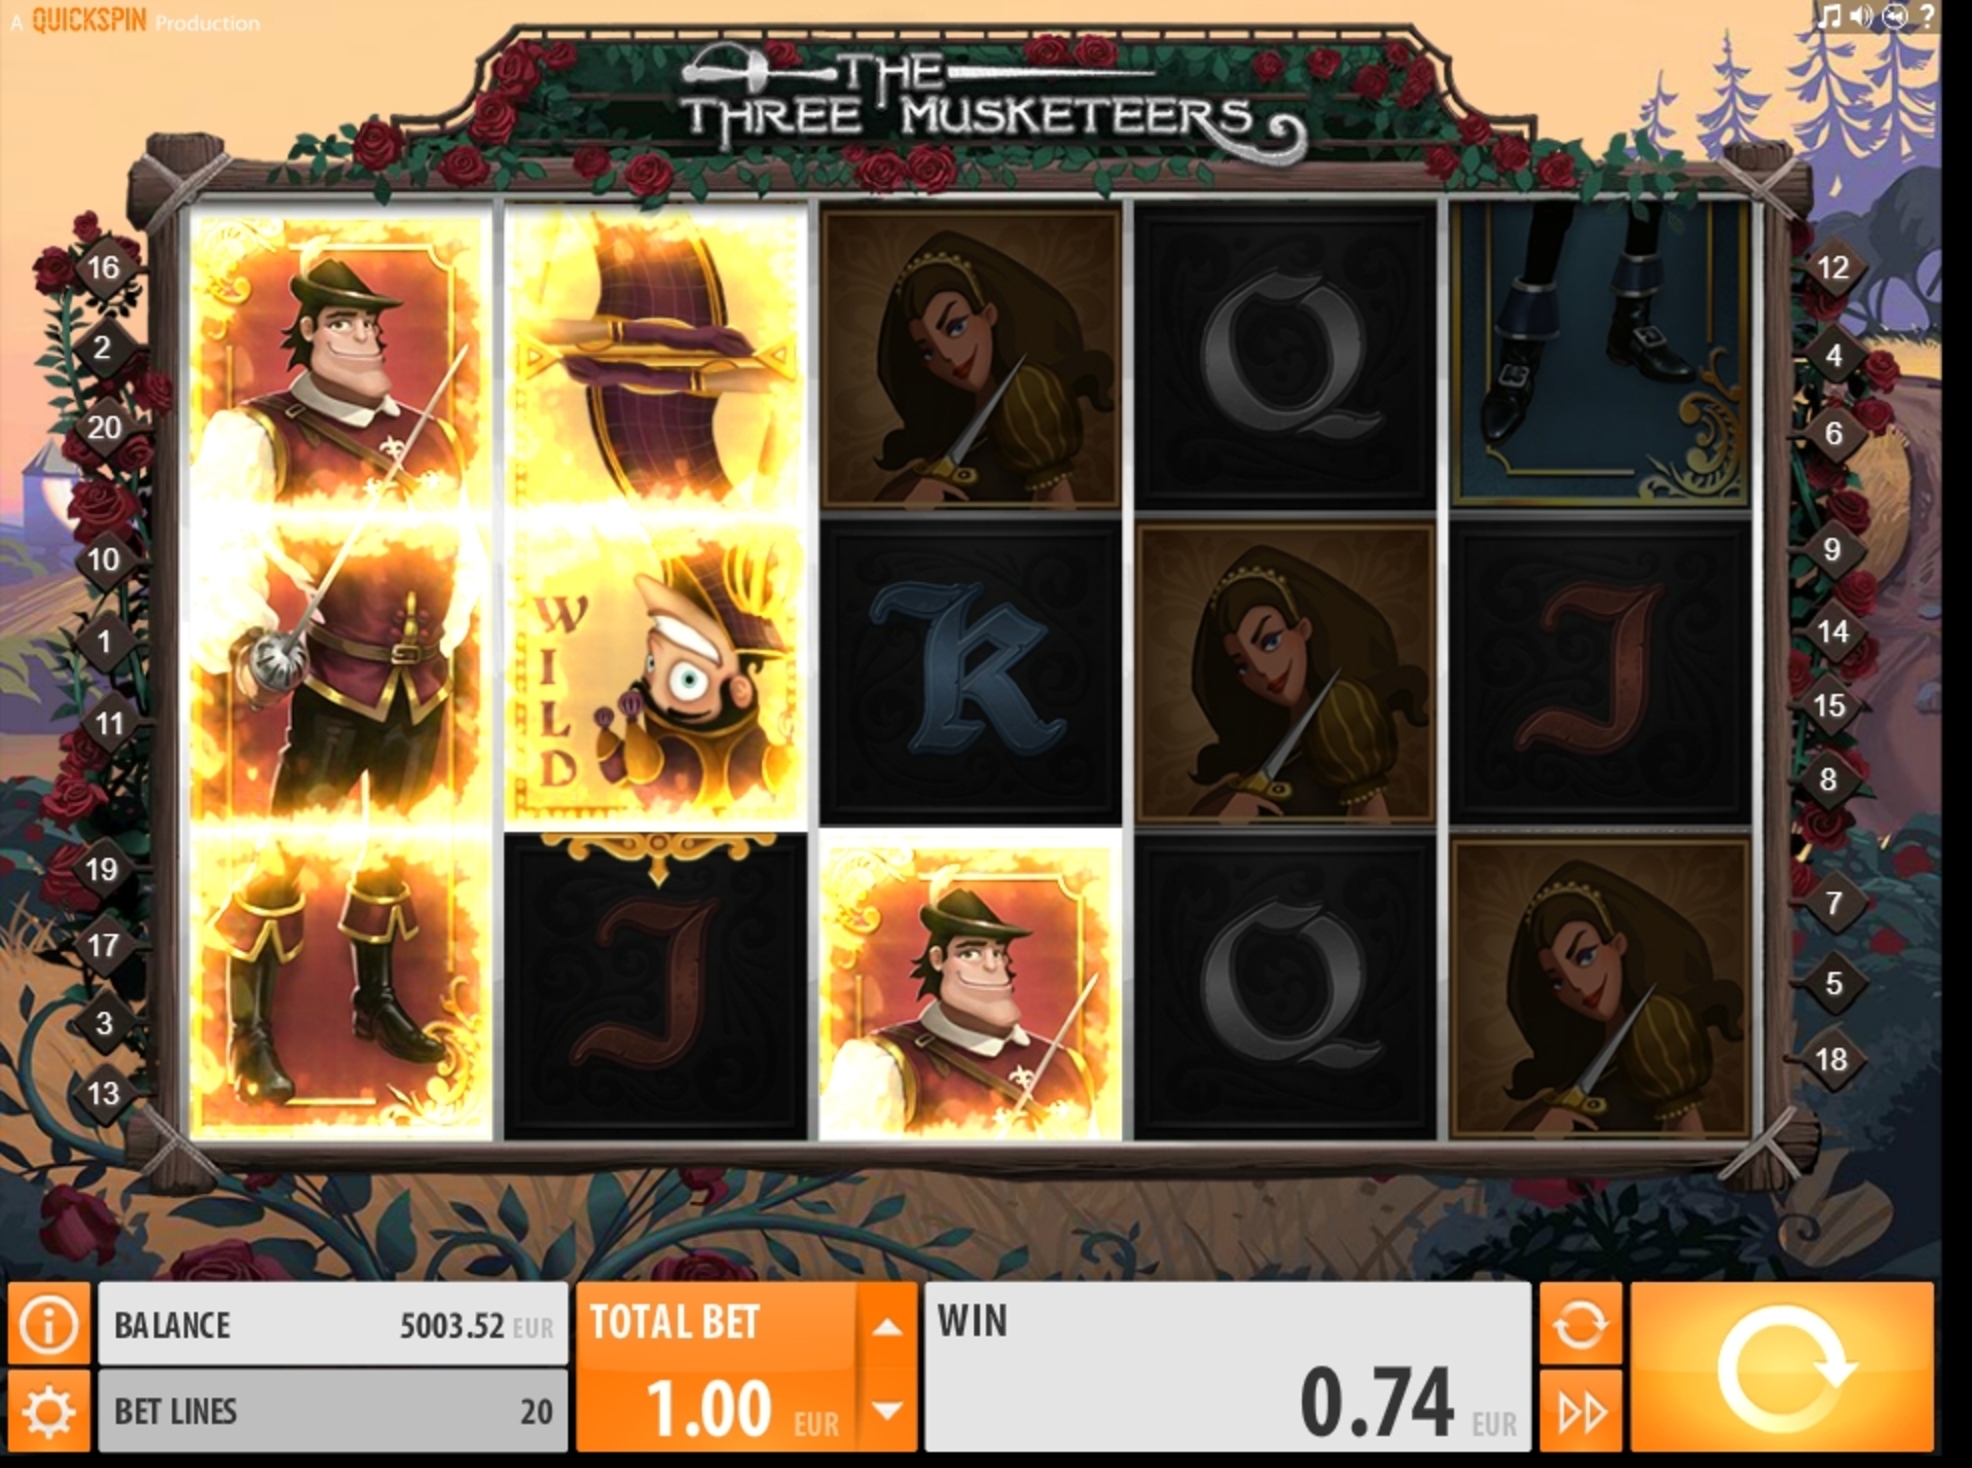 Win Money in The Three Musketeers Free Slot Game by Quickspin